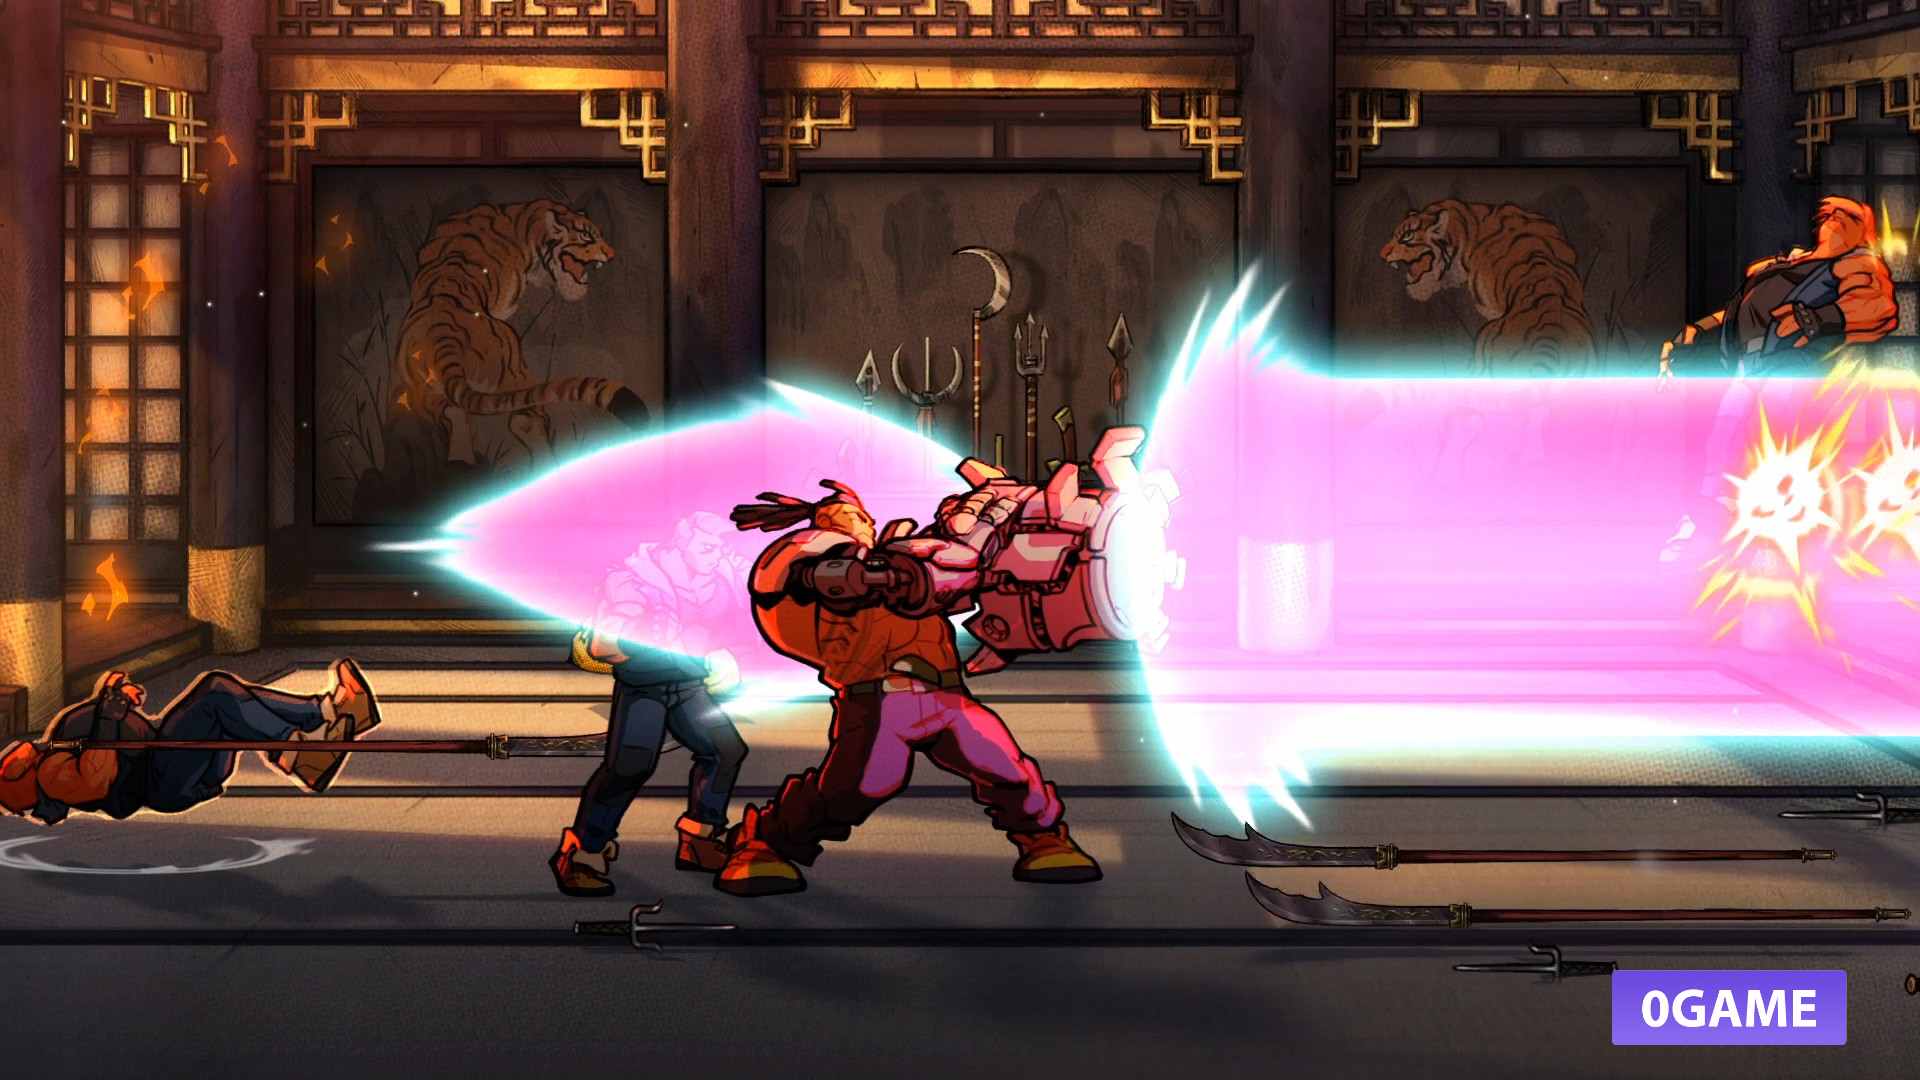 streets of rage 4 dlc switch not available